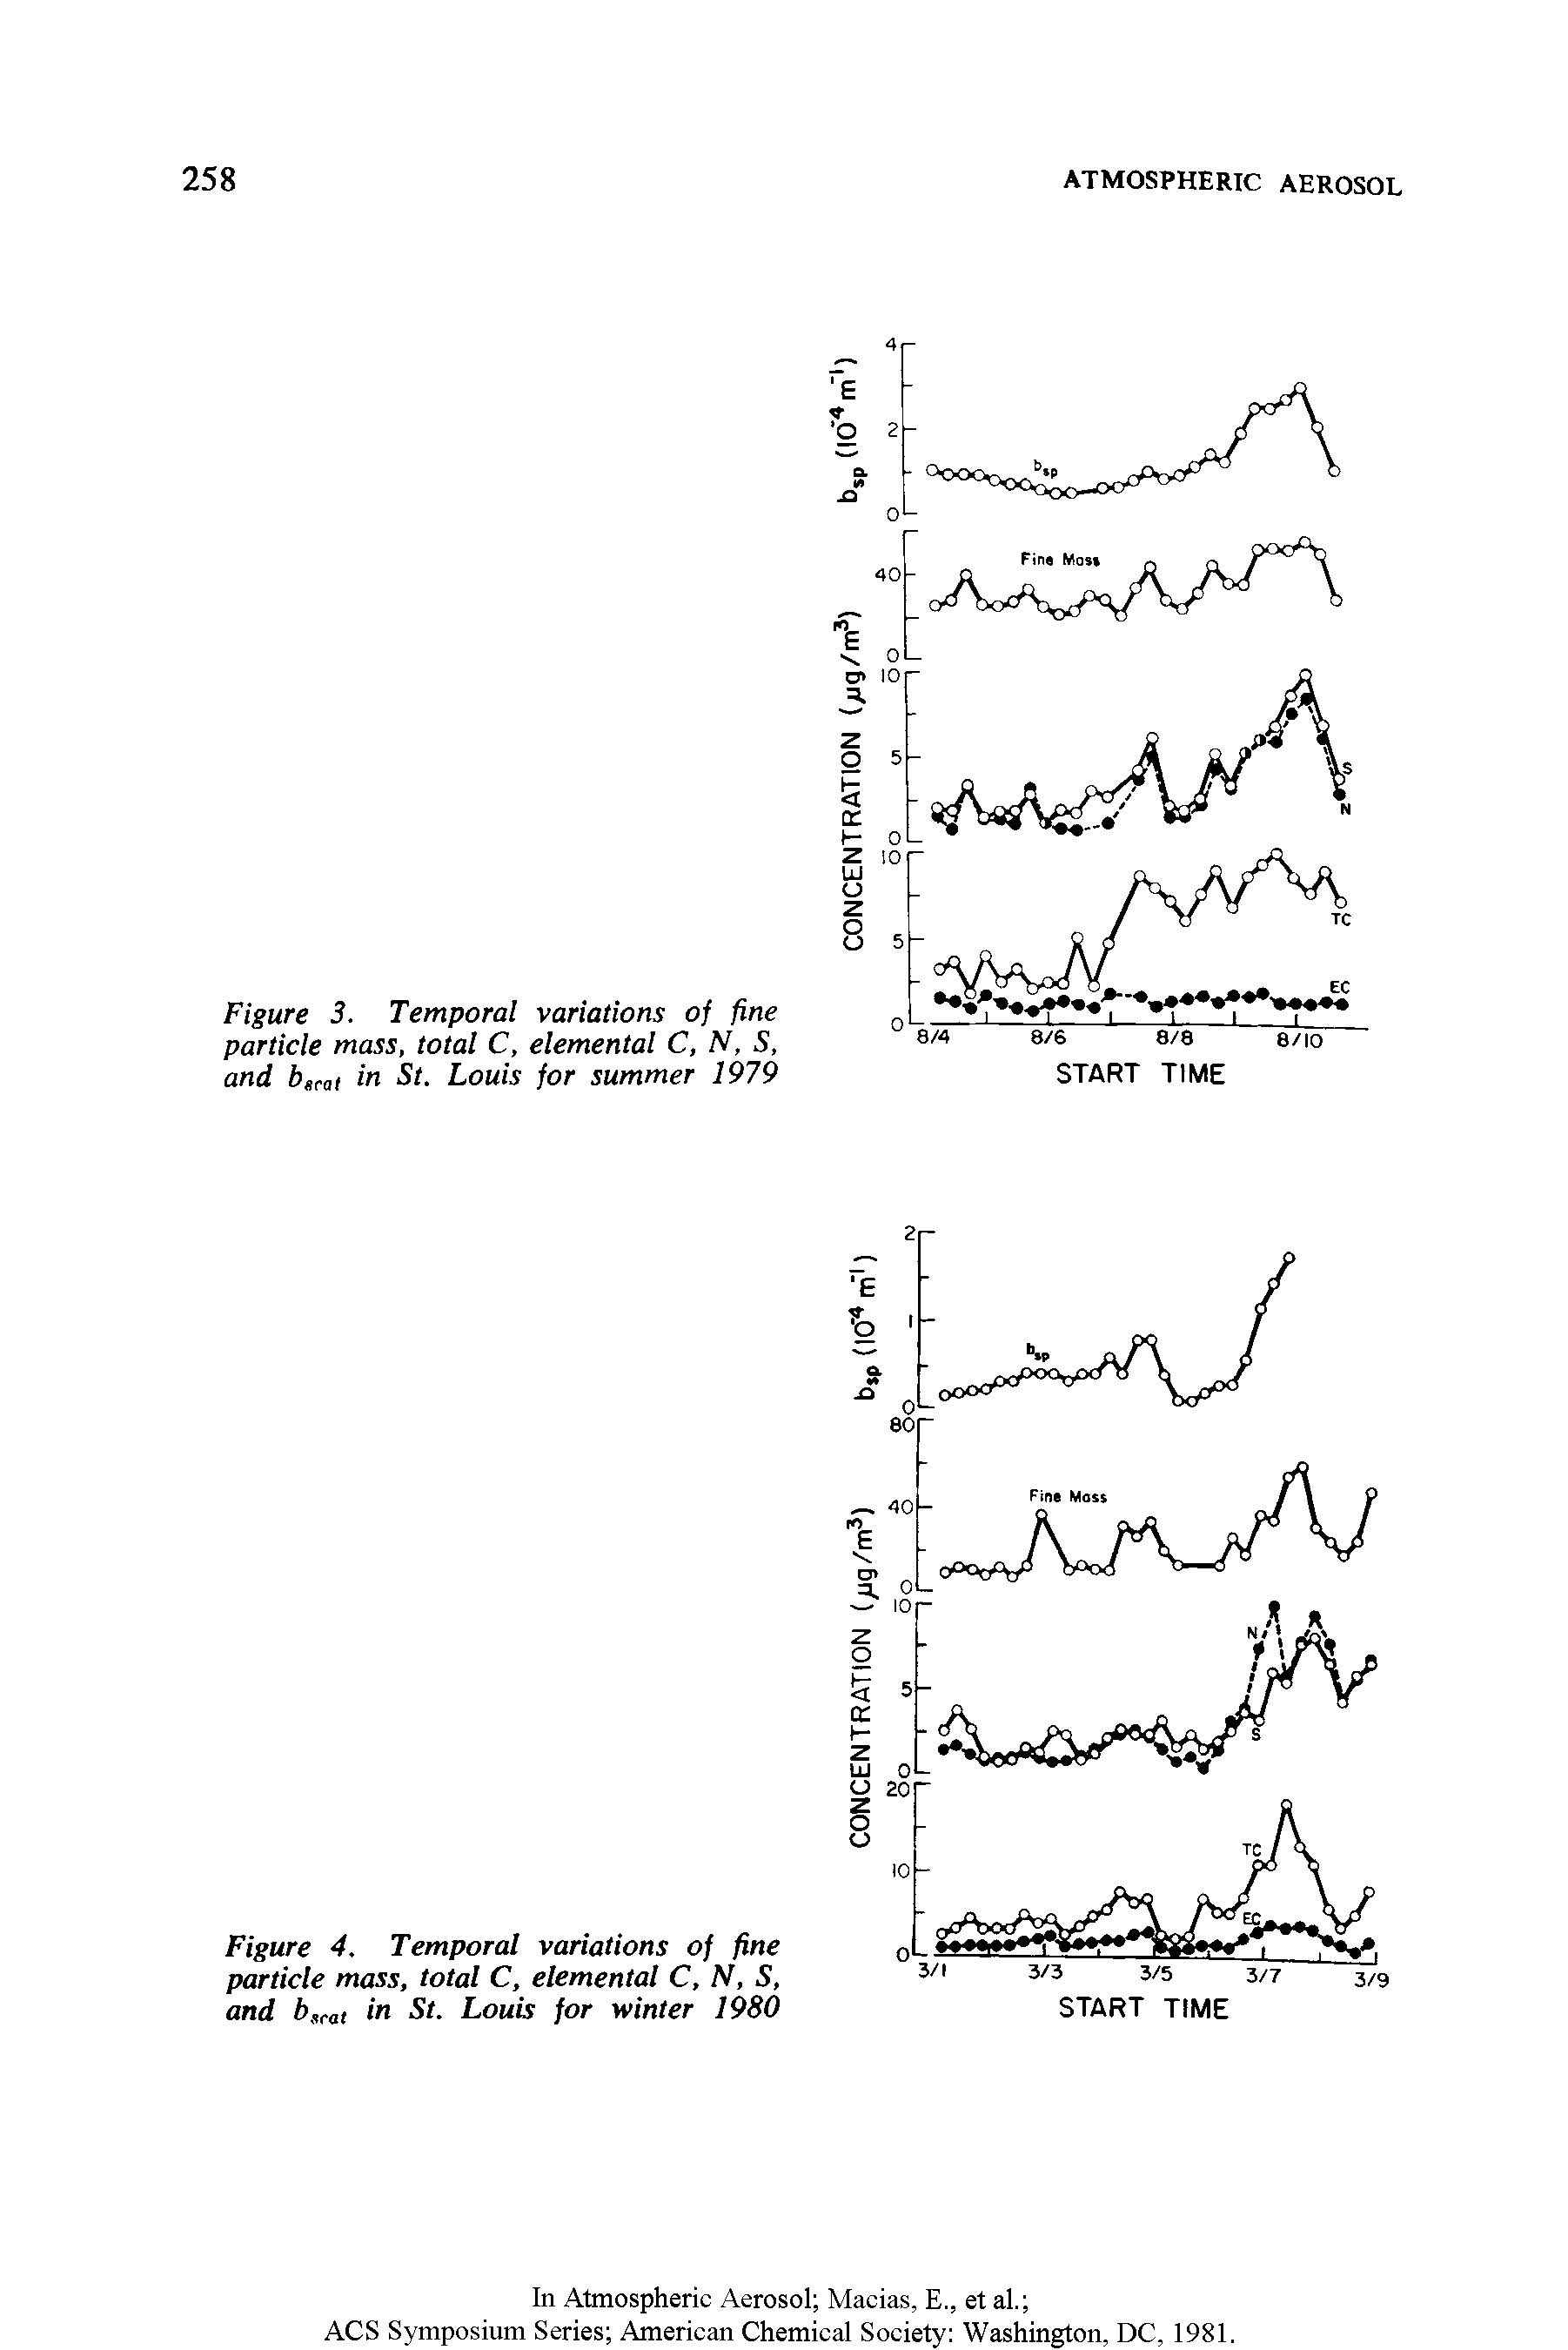 Figure 3. Temporal variations of fine particle mass, total C, elemental C, N, S, and berai in St. Louis for summer 1979...